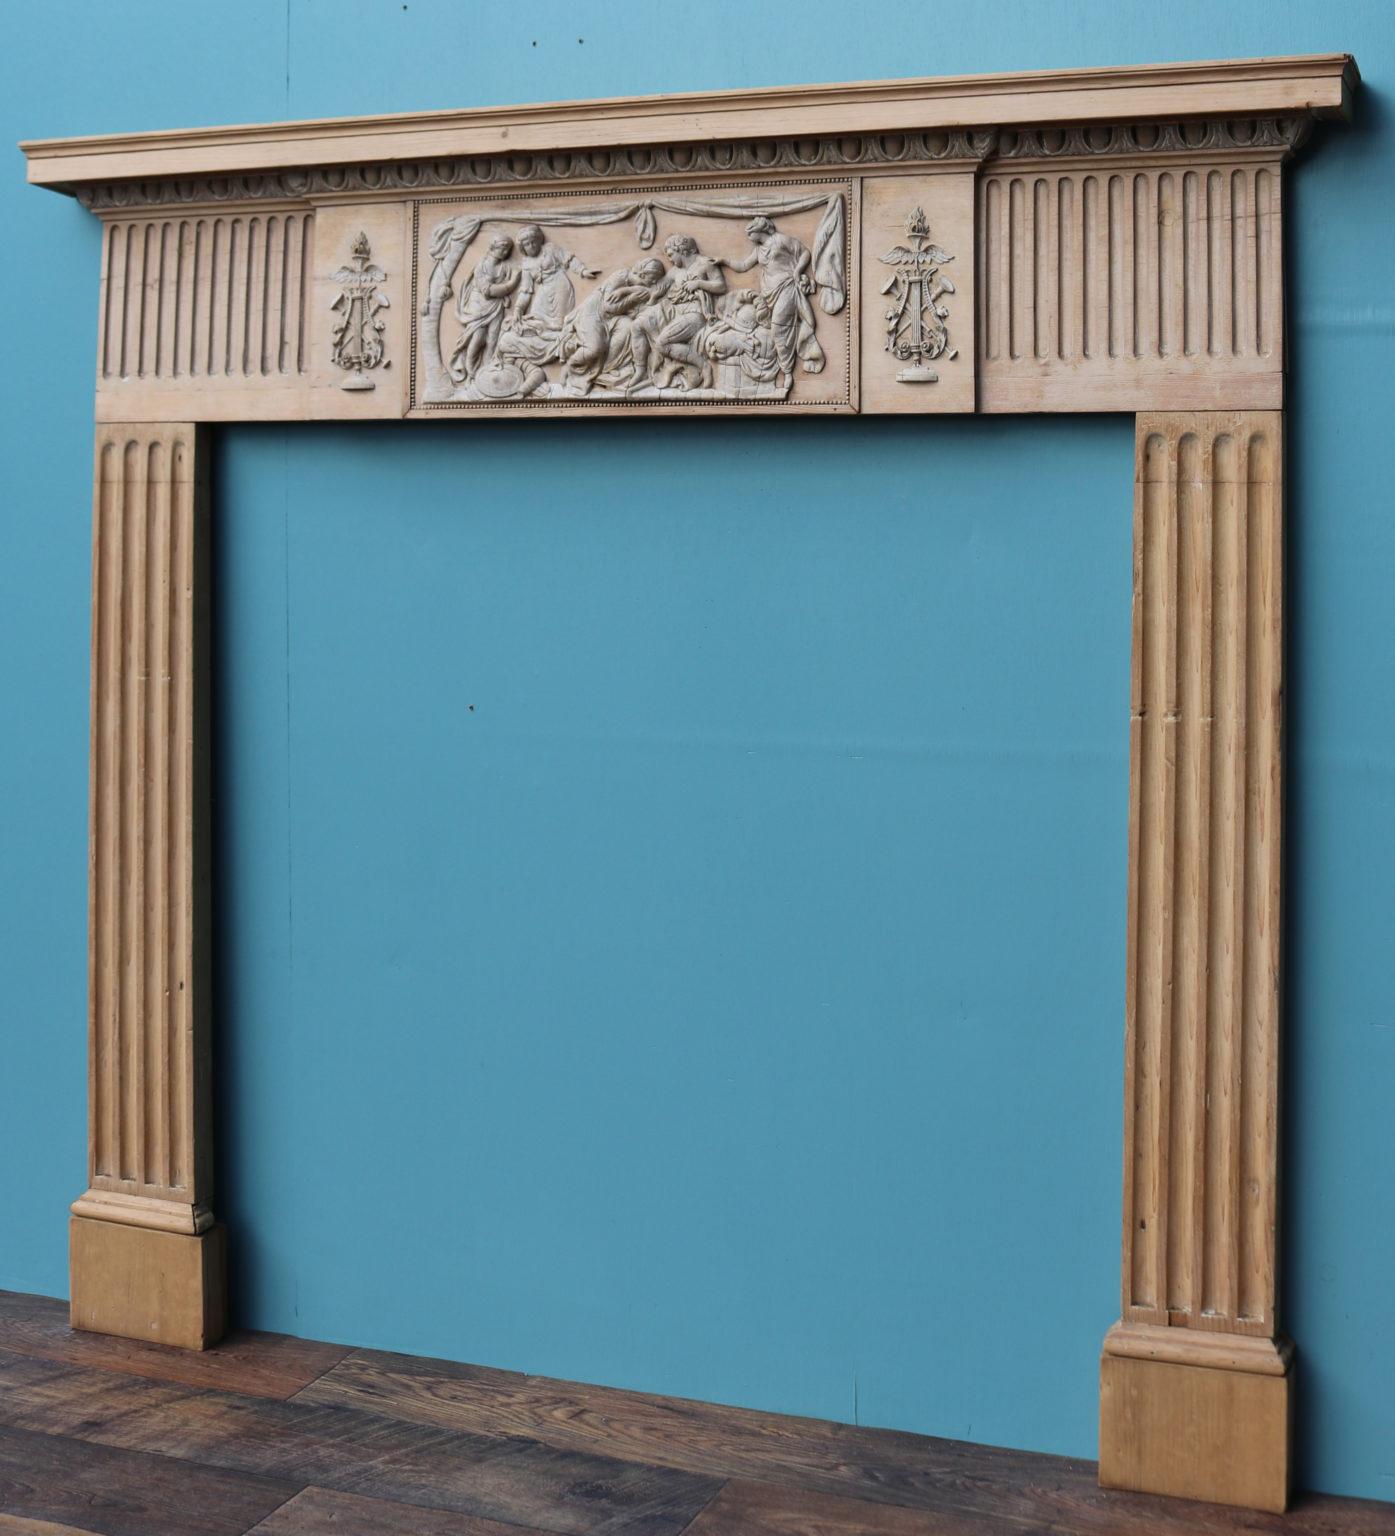 An antique neoclassical style fire surround constructed from pine, with applied gesso (composition) decoration.

Additional Dimensions
Opening height 103 cm
Opening width 104.5 cm
Width between outside of foot blocks 135 cm.